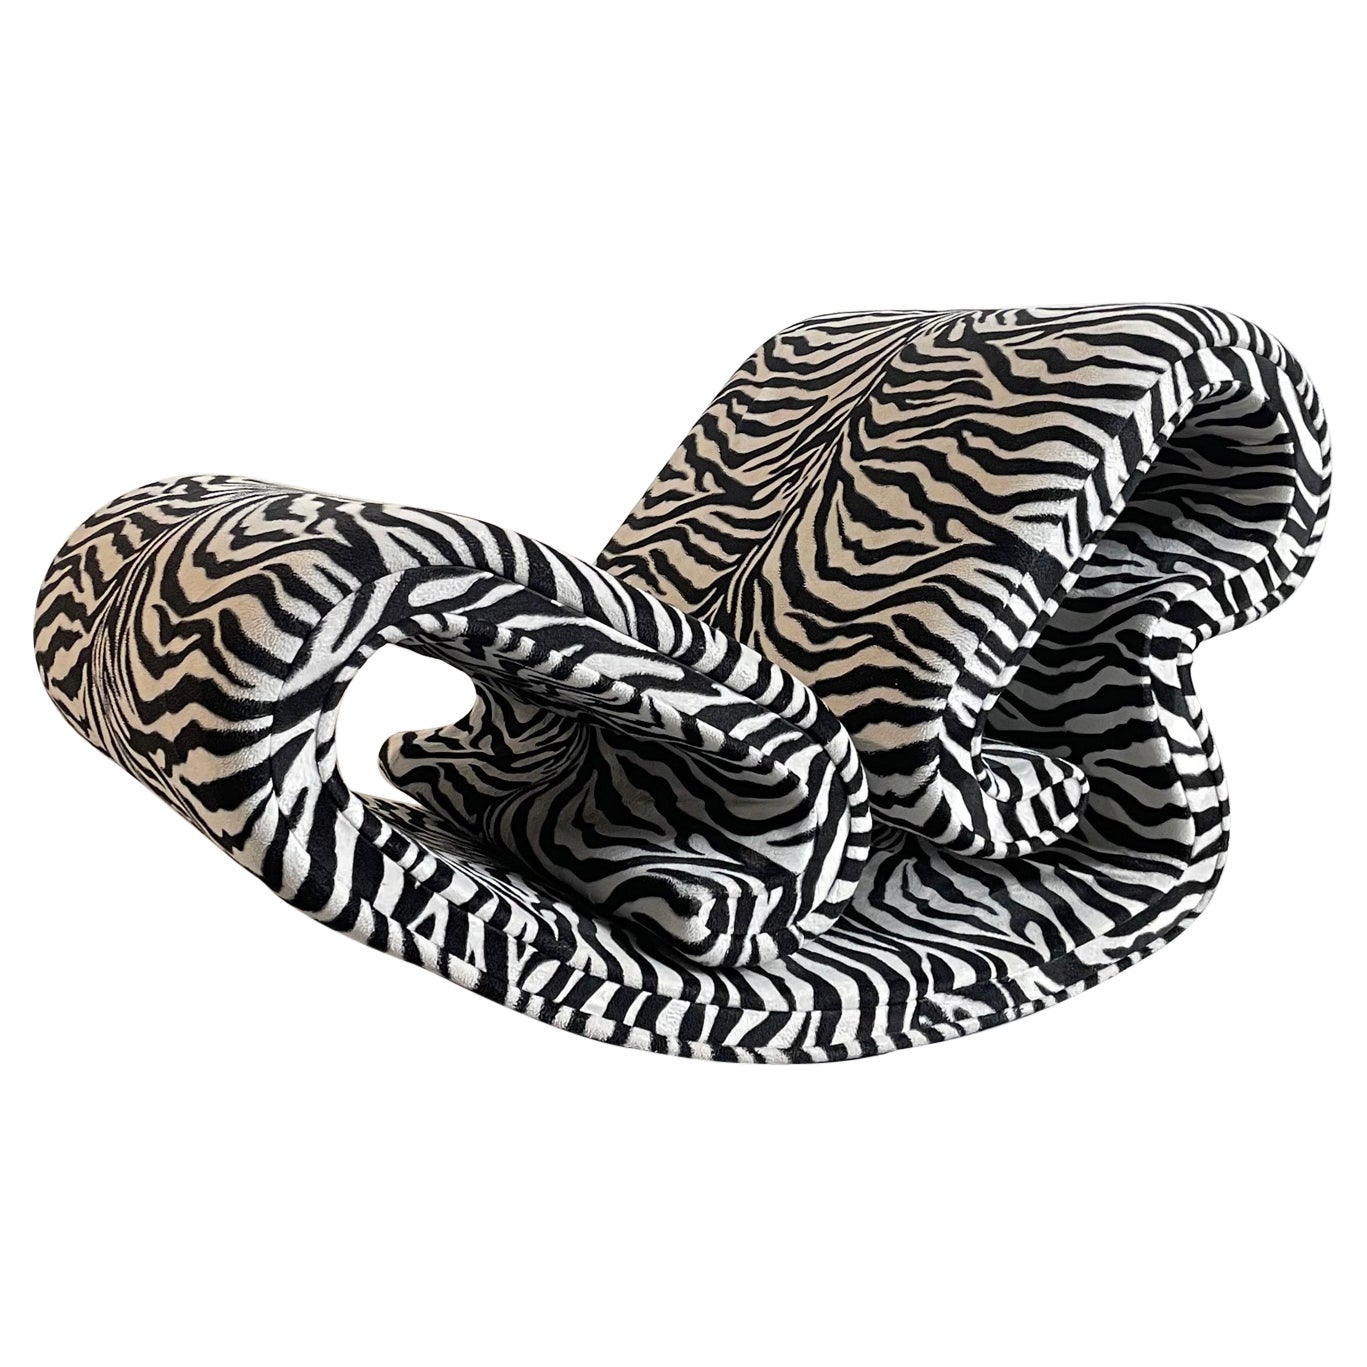 Vintage Sculptural Organic Shape Lounge Chair in Zebra Fabric, C1970s For Sale